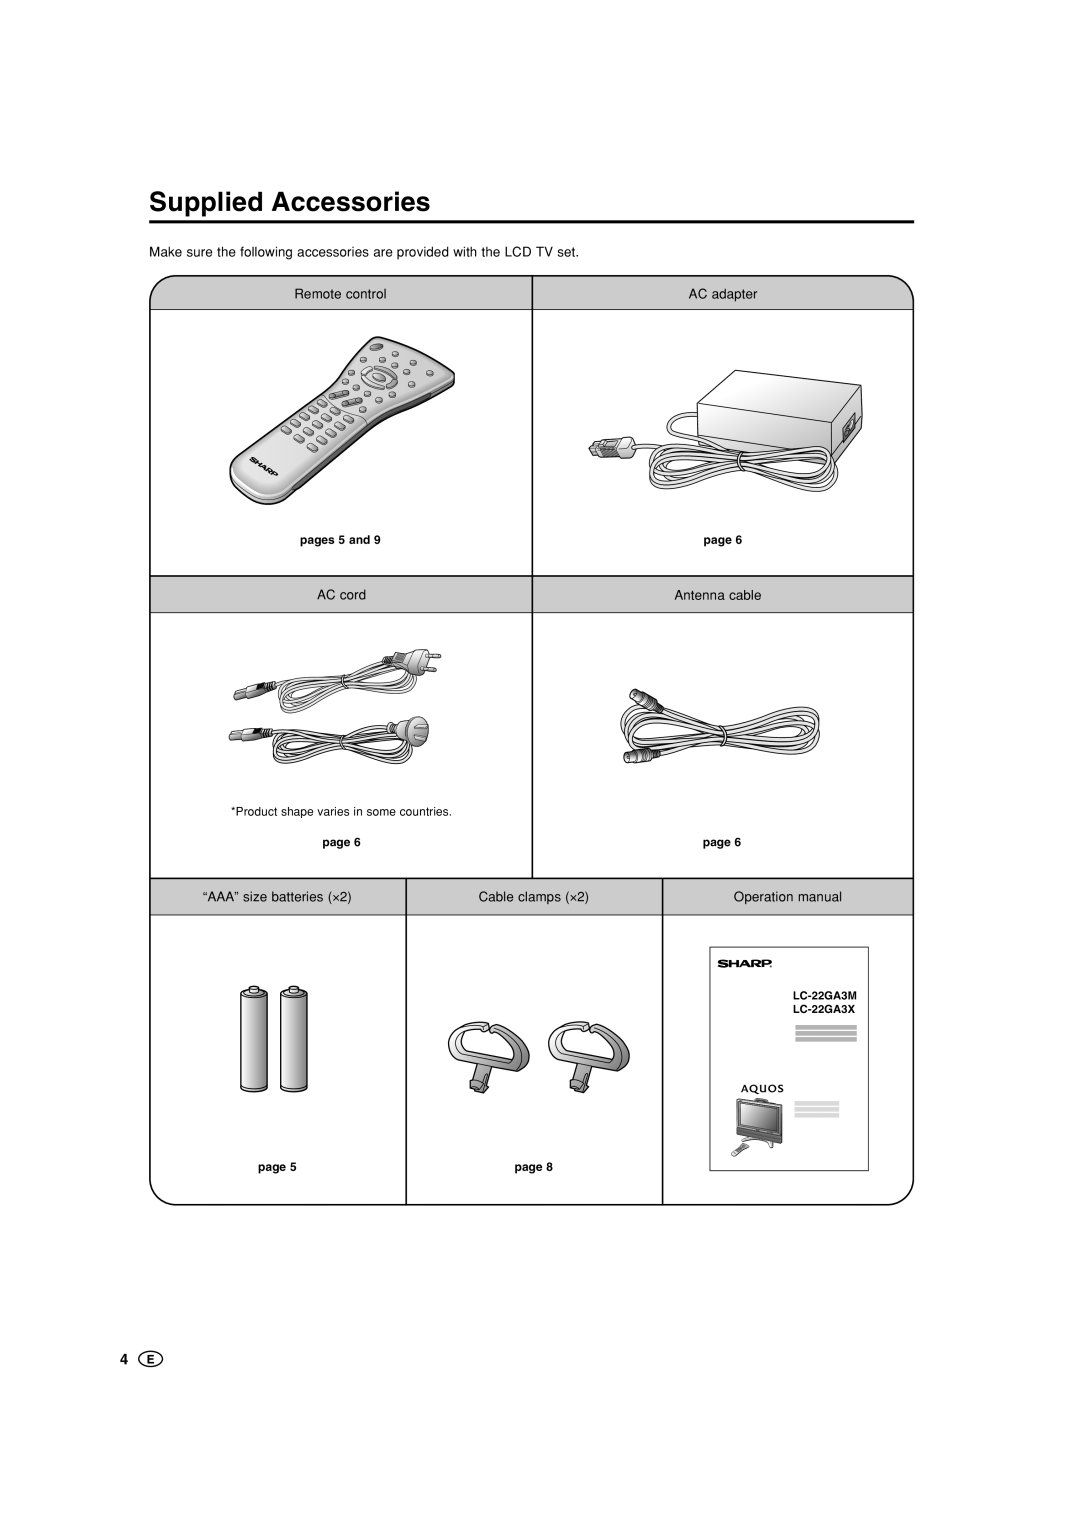 Sharp LC-22GA3M Supplied Accessories, Make sure the following accessories are provided with the LCD TV set, Remote control 